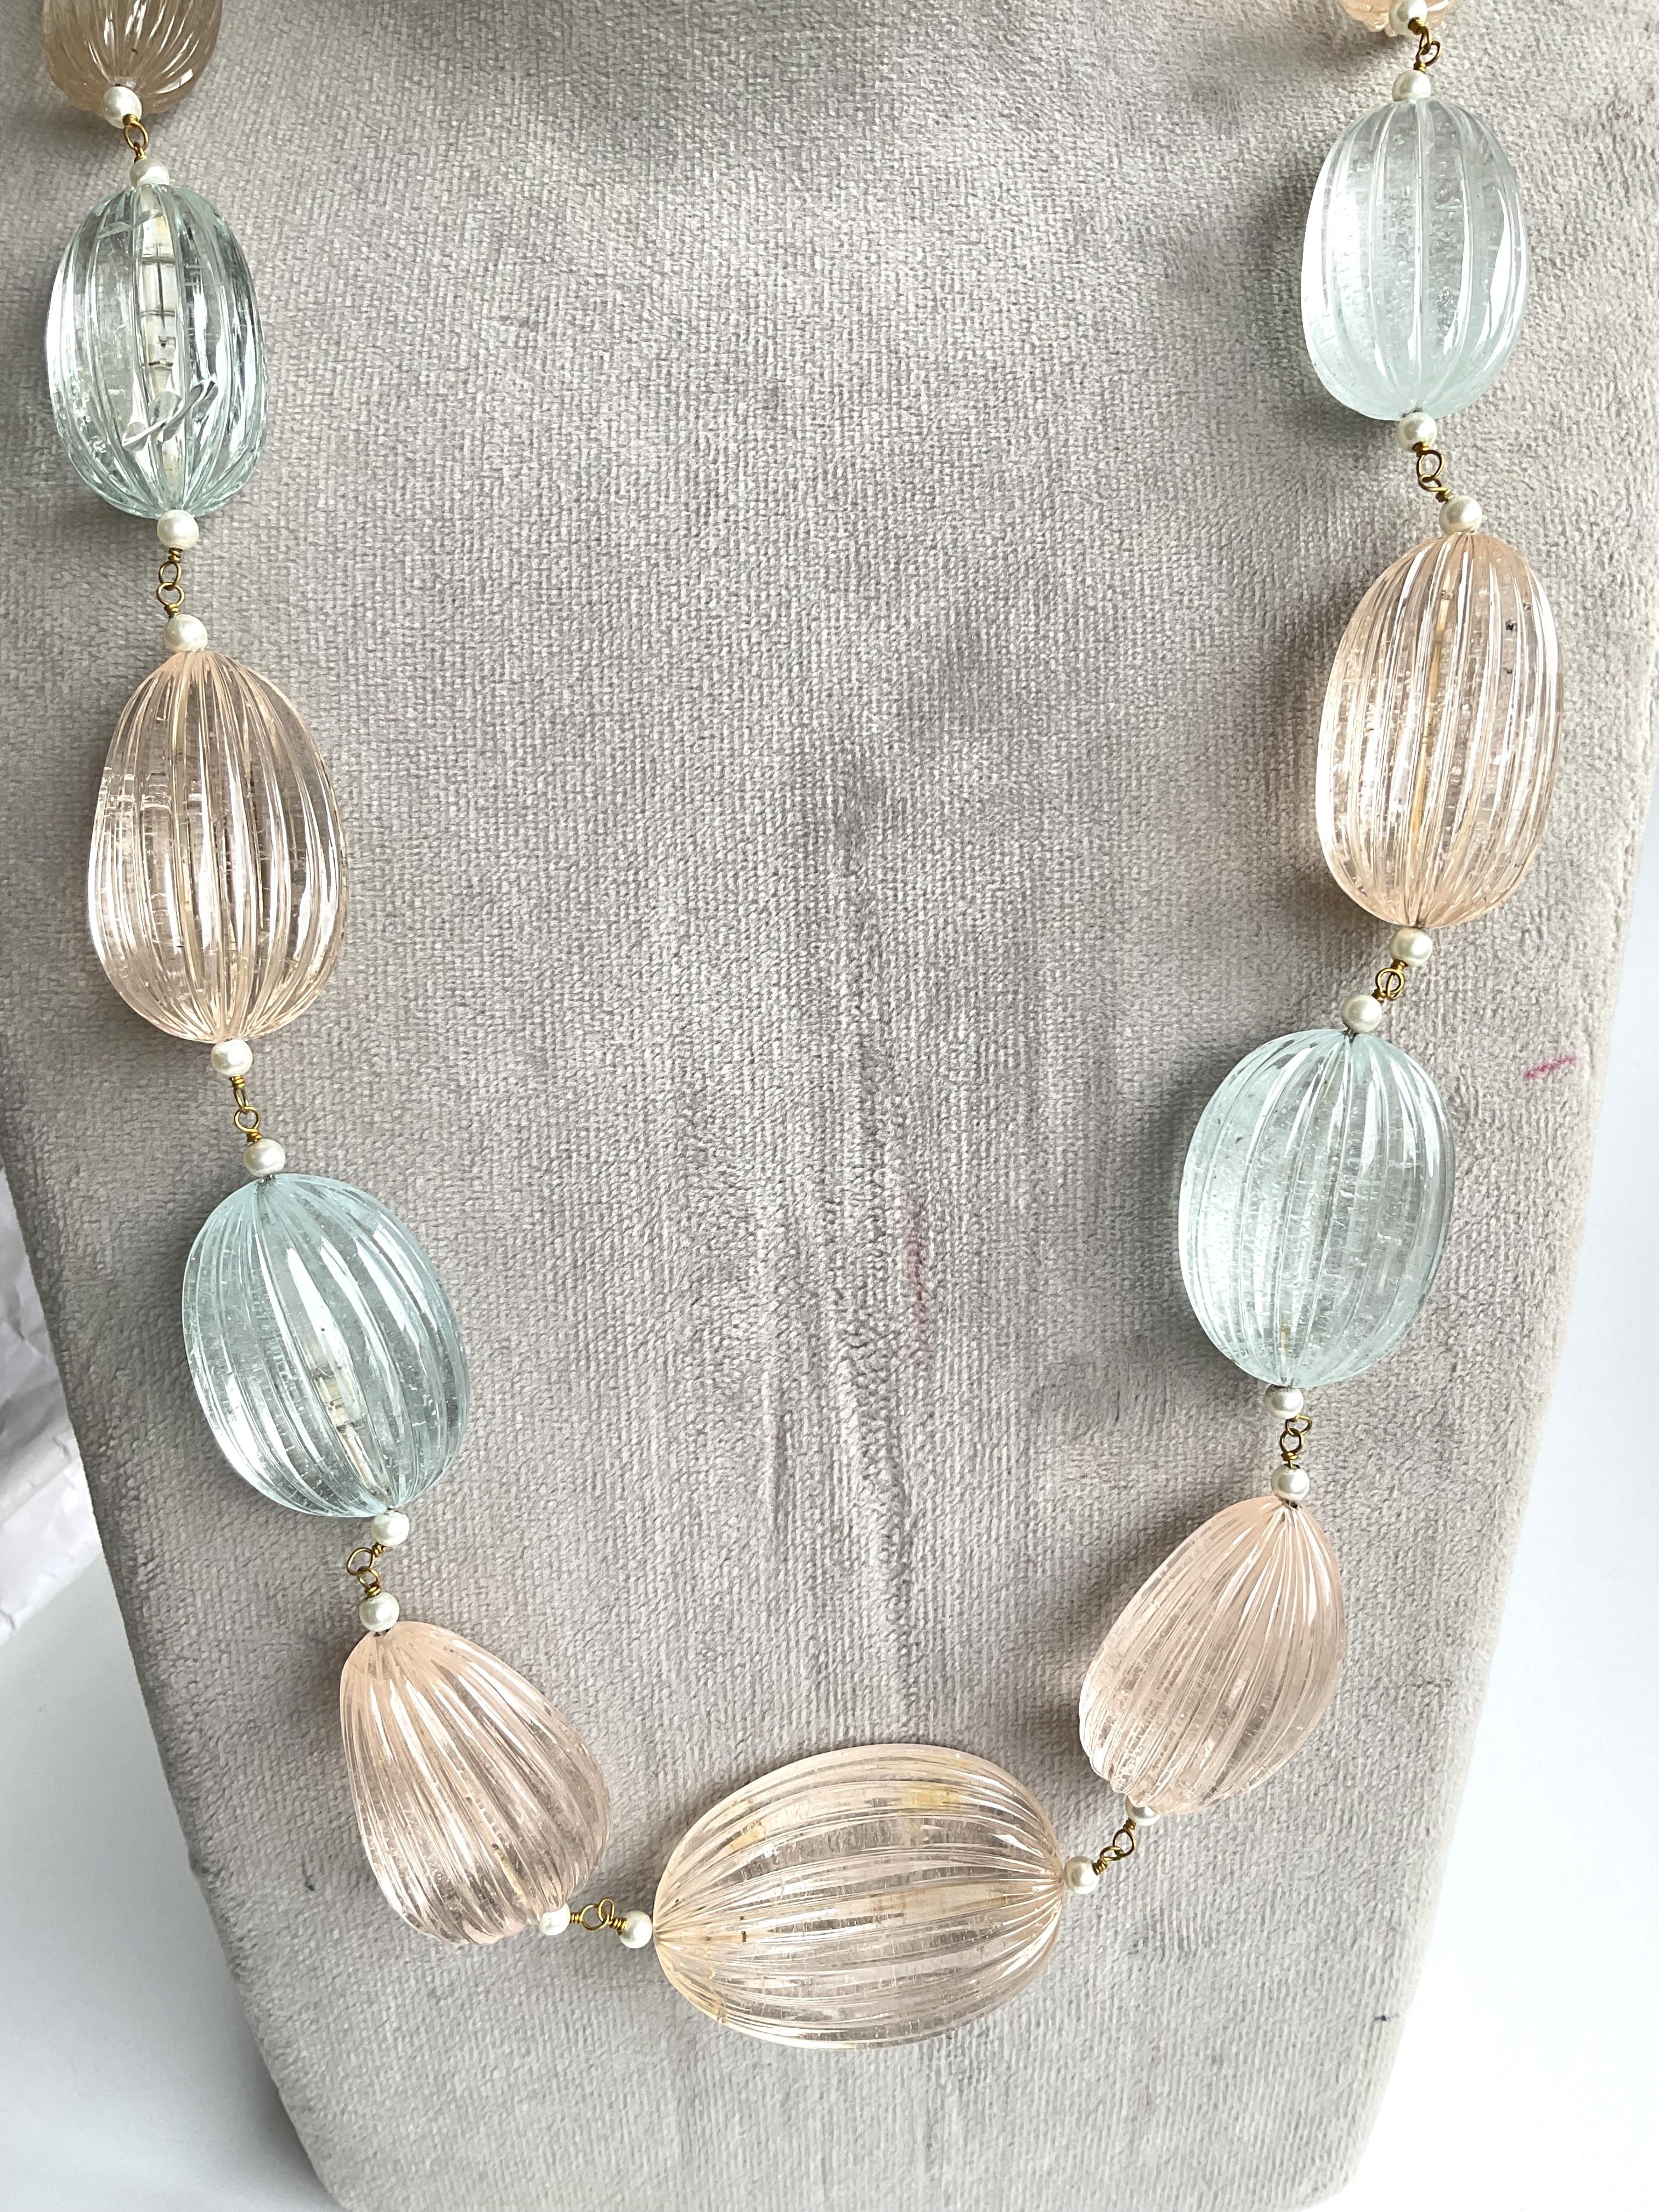 Art Deco 1501.35 carats Aquamarine Morganite Jewelry fluted Tumbled Necklace beryl Gems For Sale